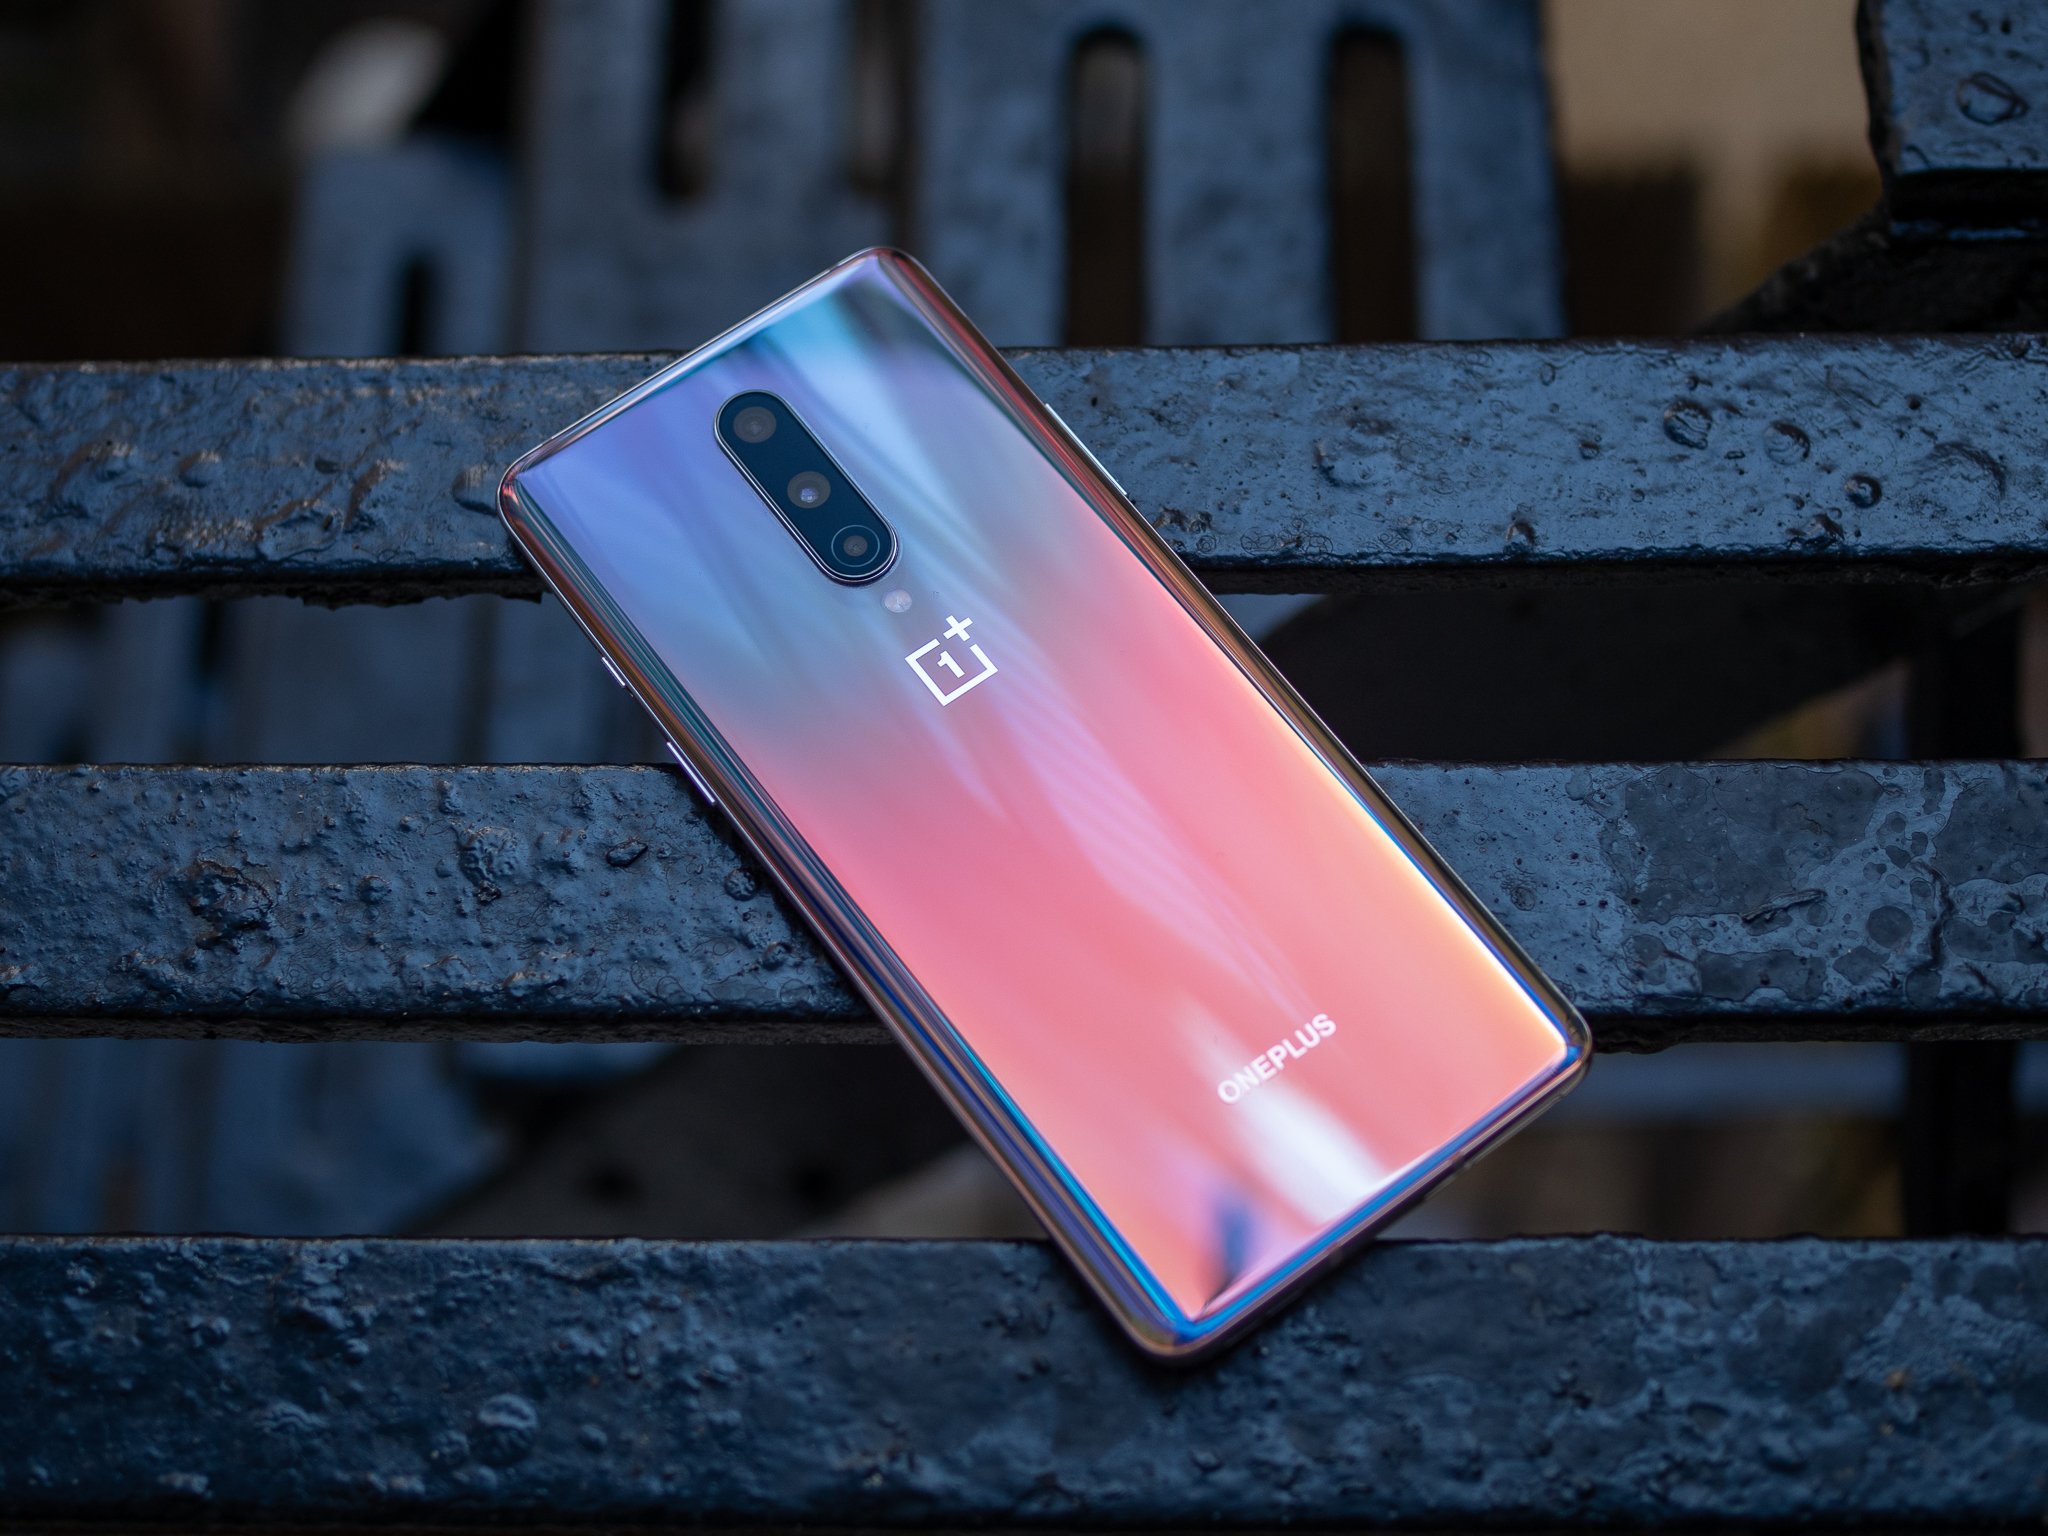 The OnePlus 8 series phones can now run Fortnite at 90 fps thumbnail